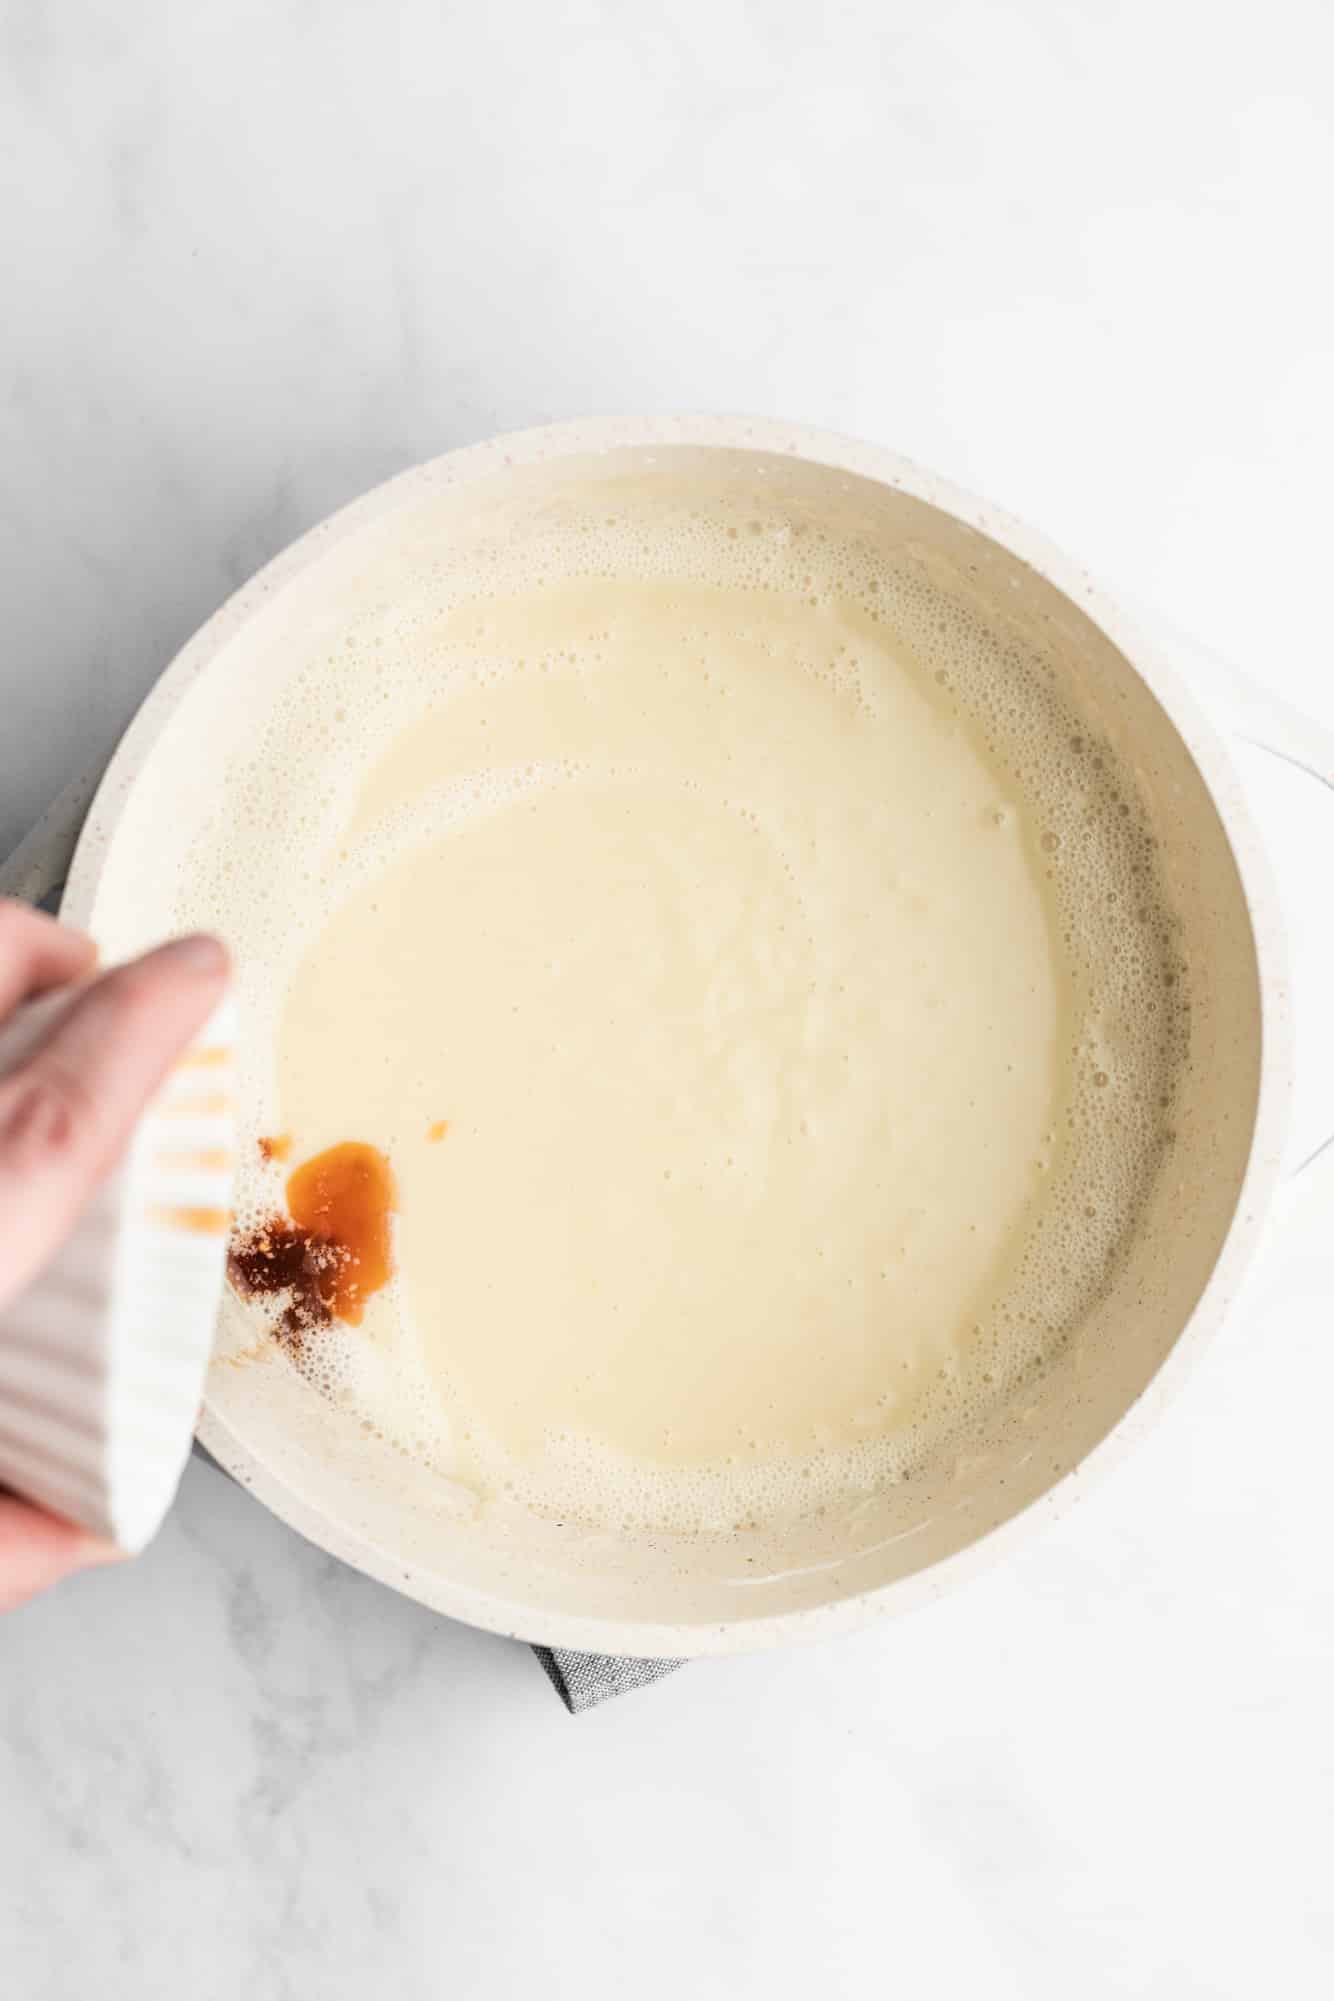 womans hand pouring vanilla extract into a creamy white custard.